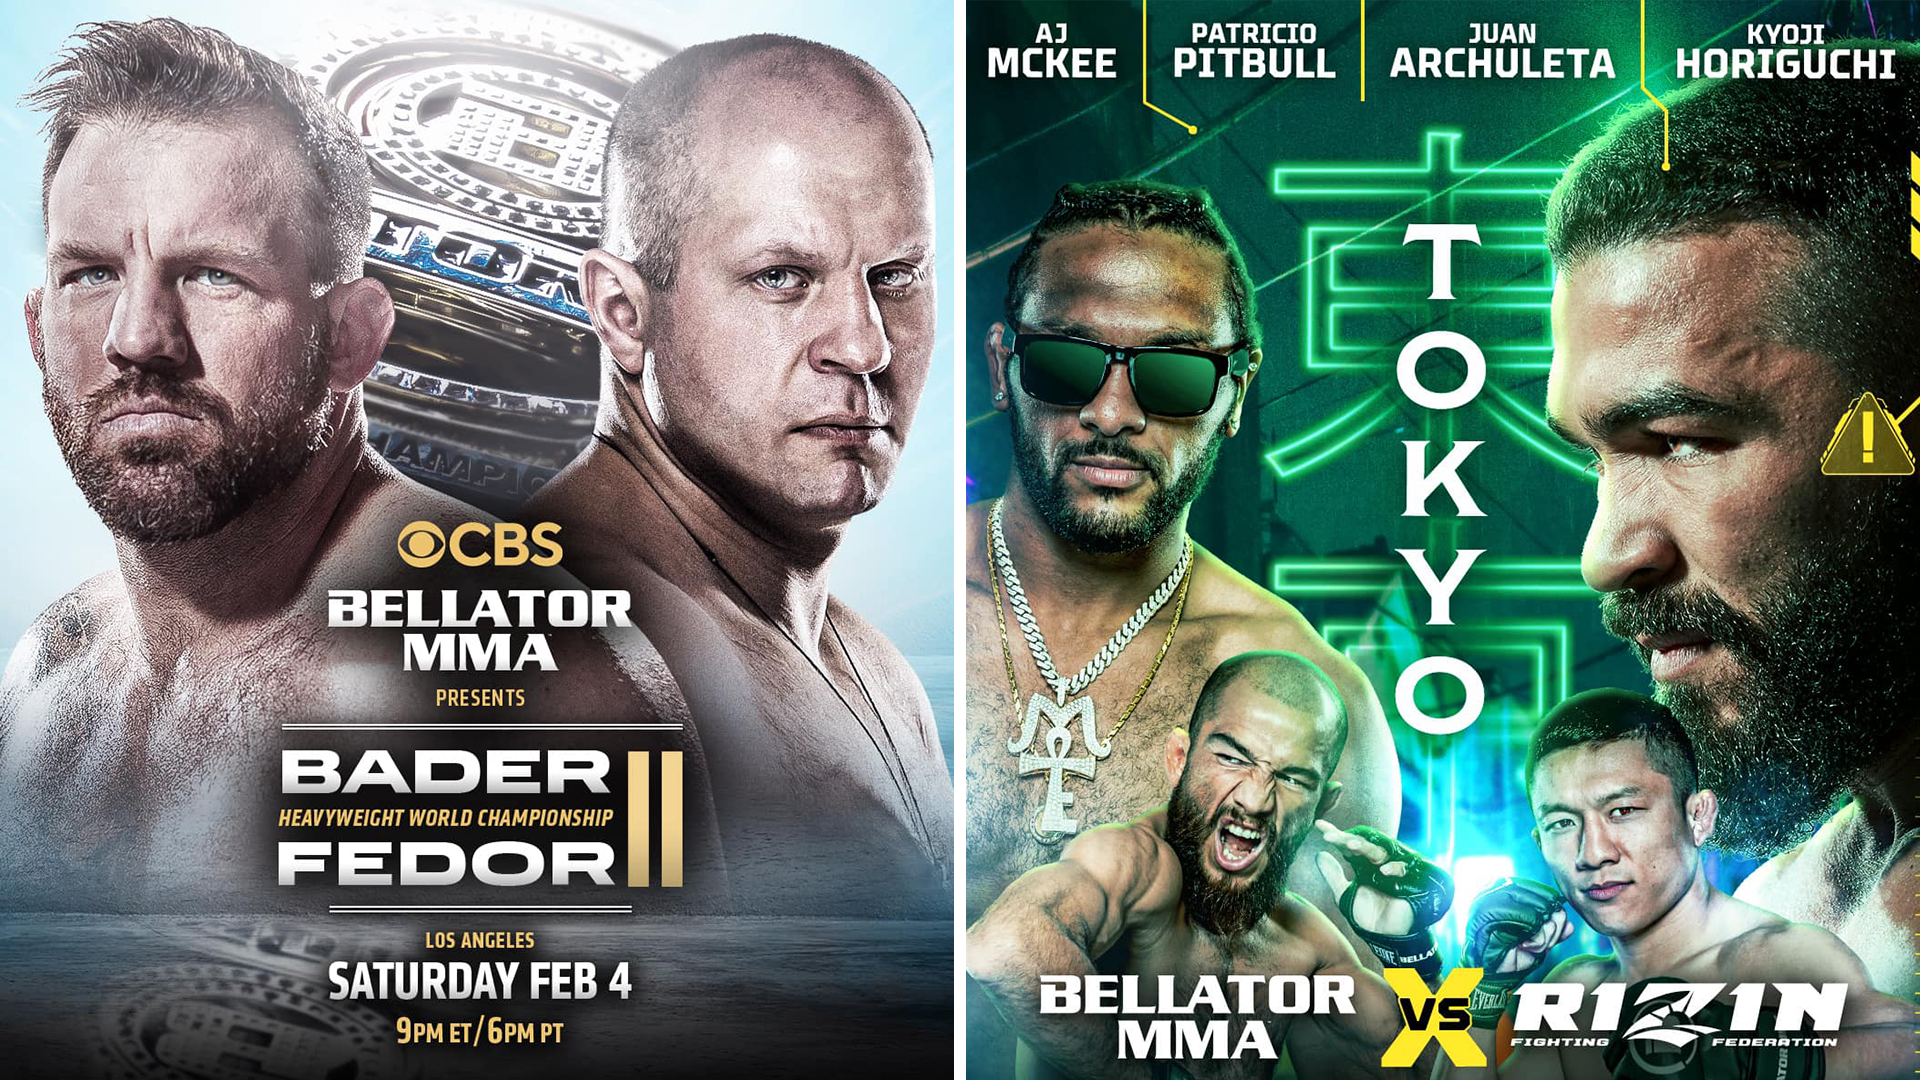 Summer of Bellator Historic Events and Title Fights